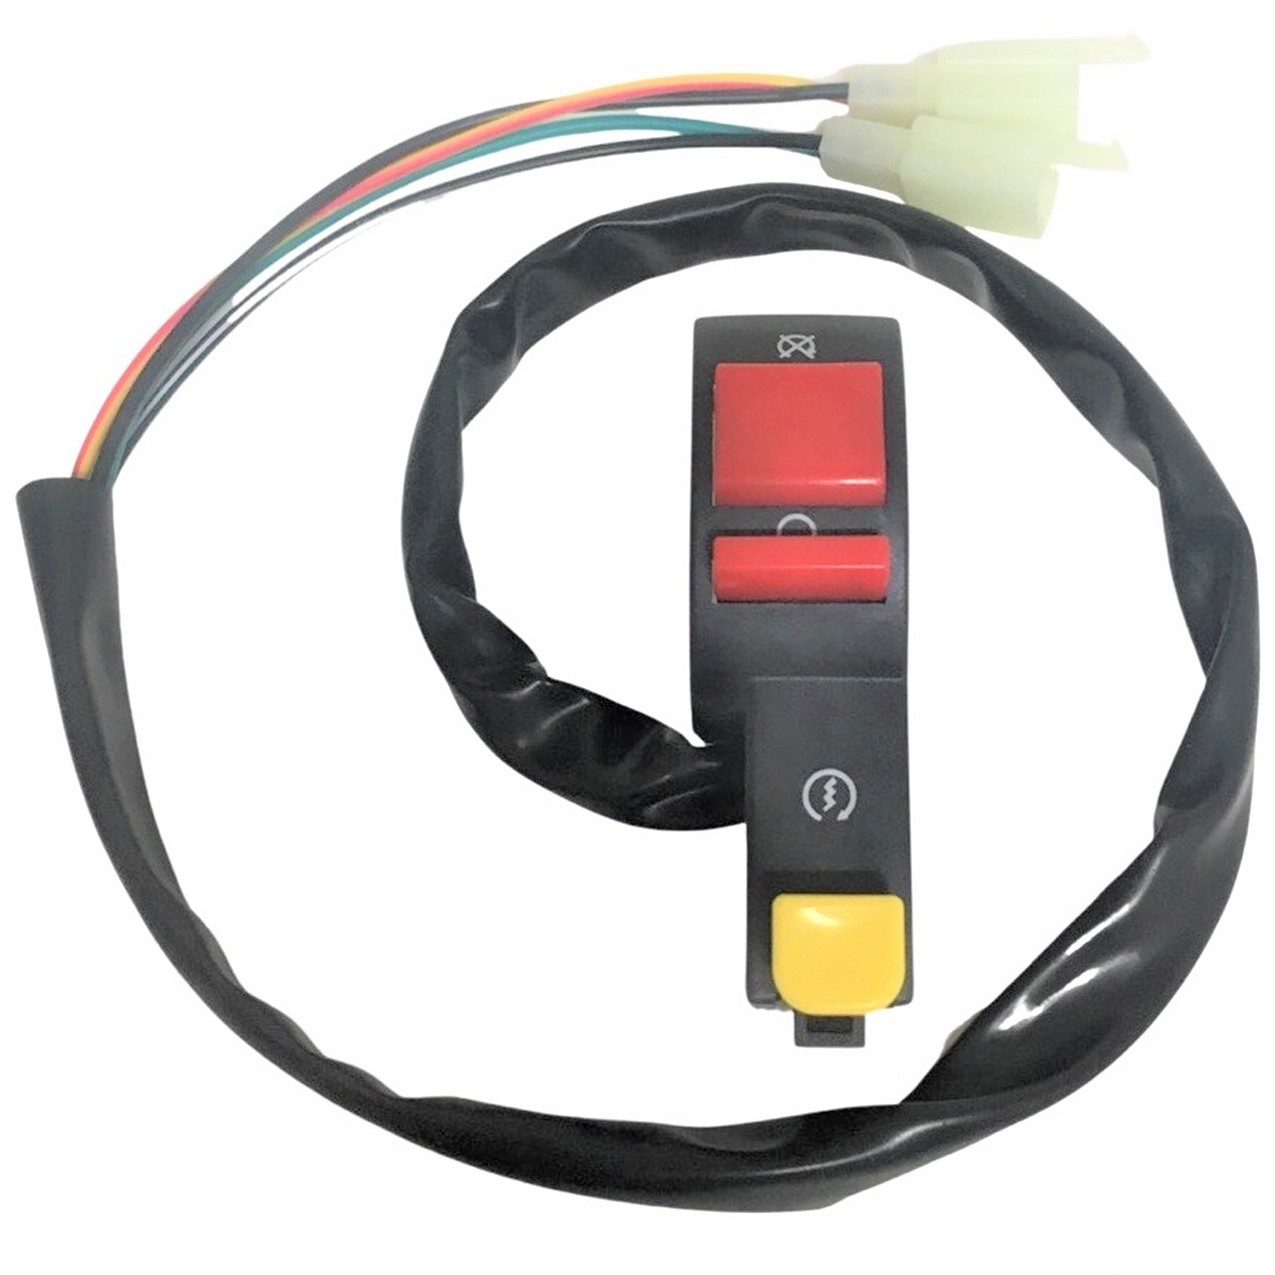 Kill Switch with Electric Start Button 2 Wire Female Jack + 2 Wire Female Jack. Fits Many Dirt Bikes and ATV's - Click Image to Close